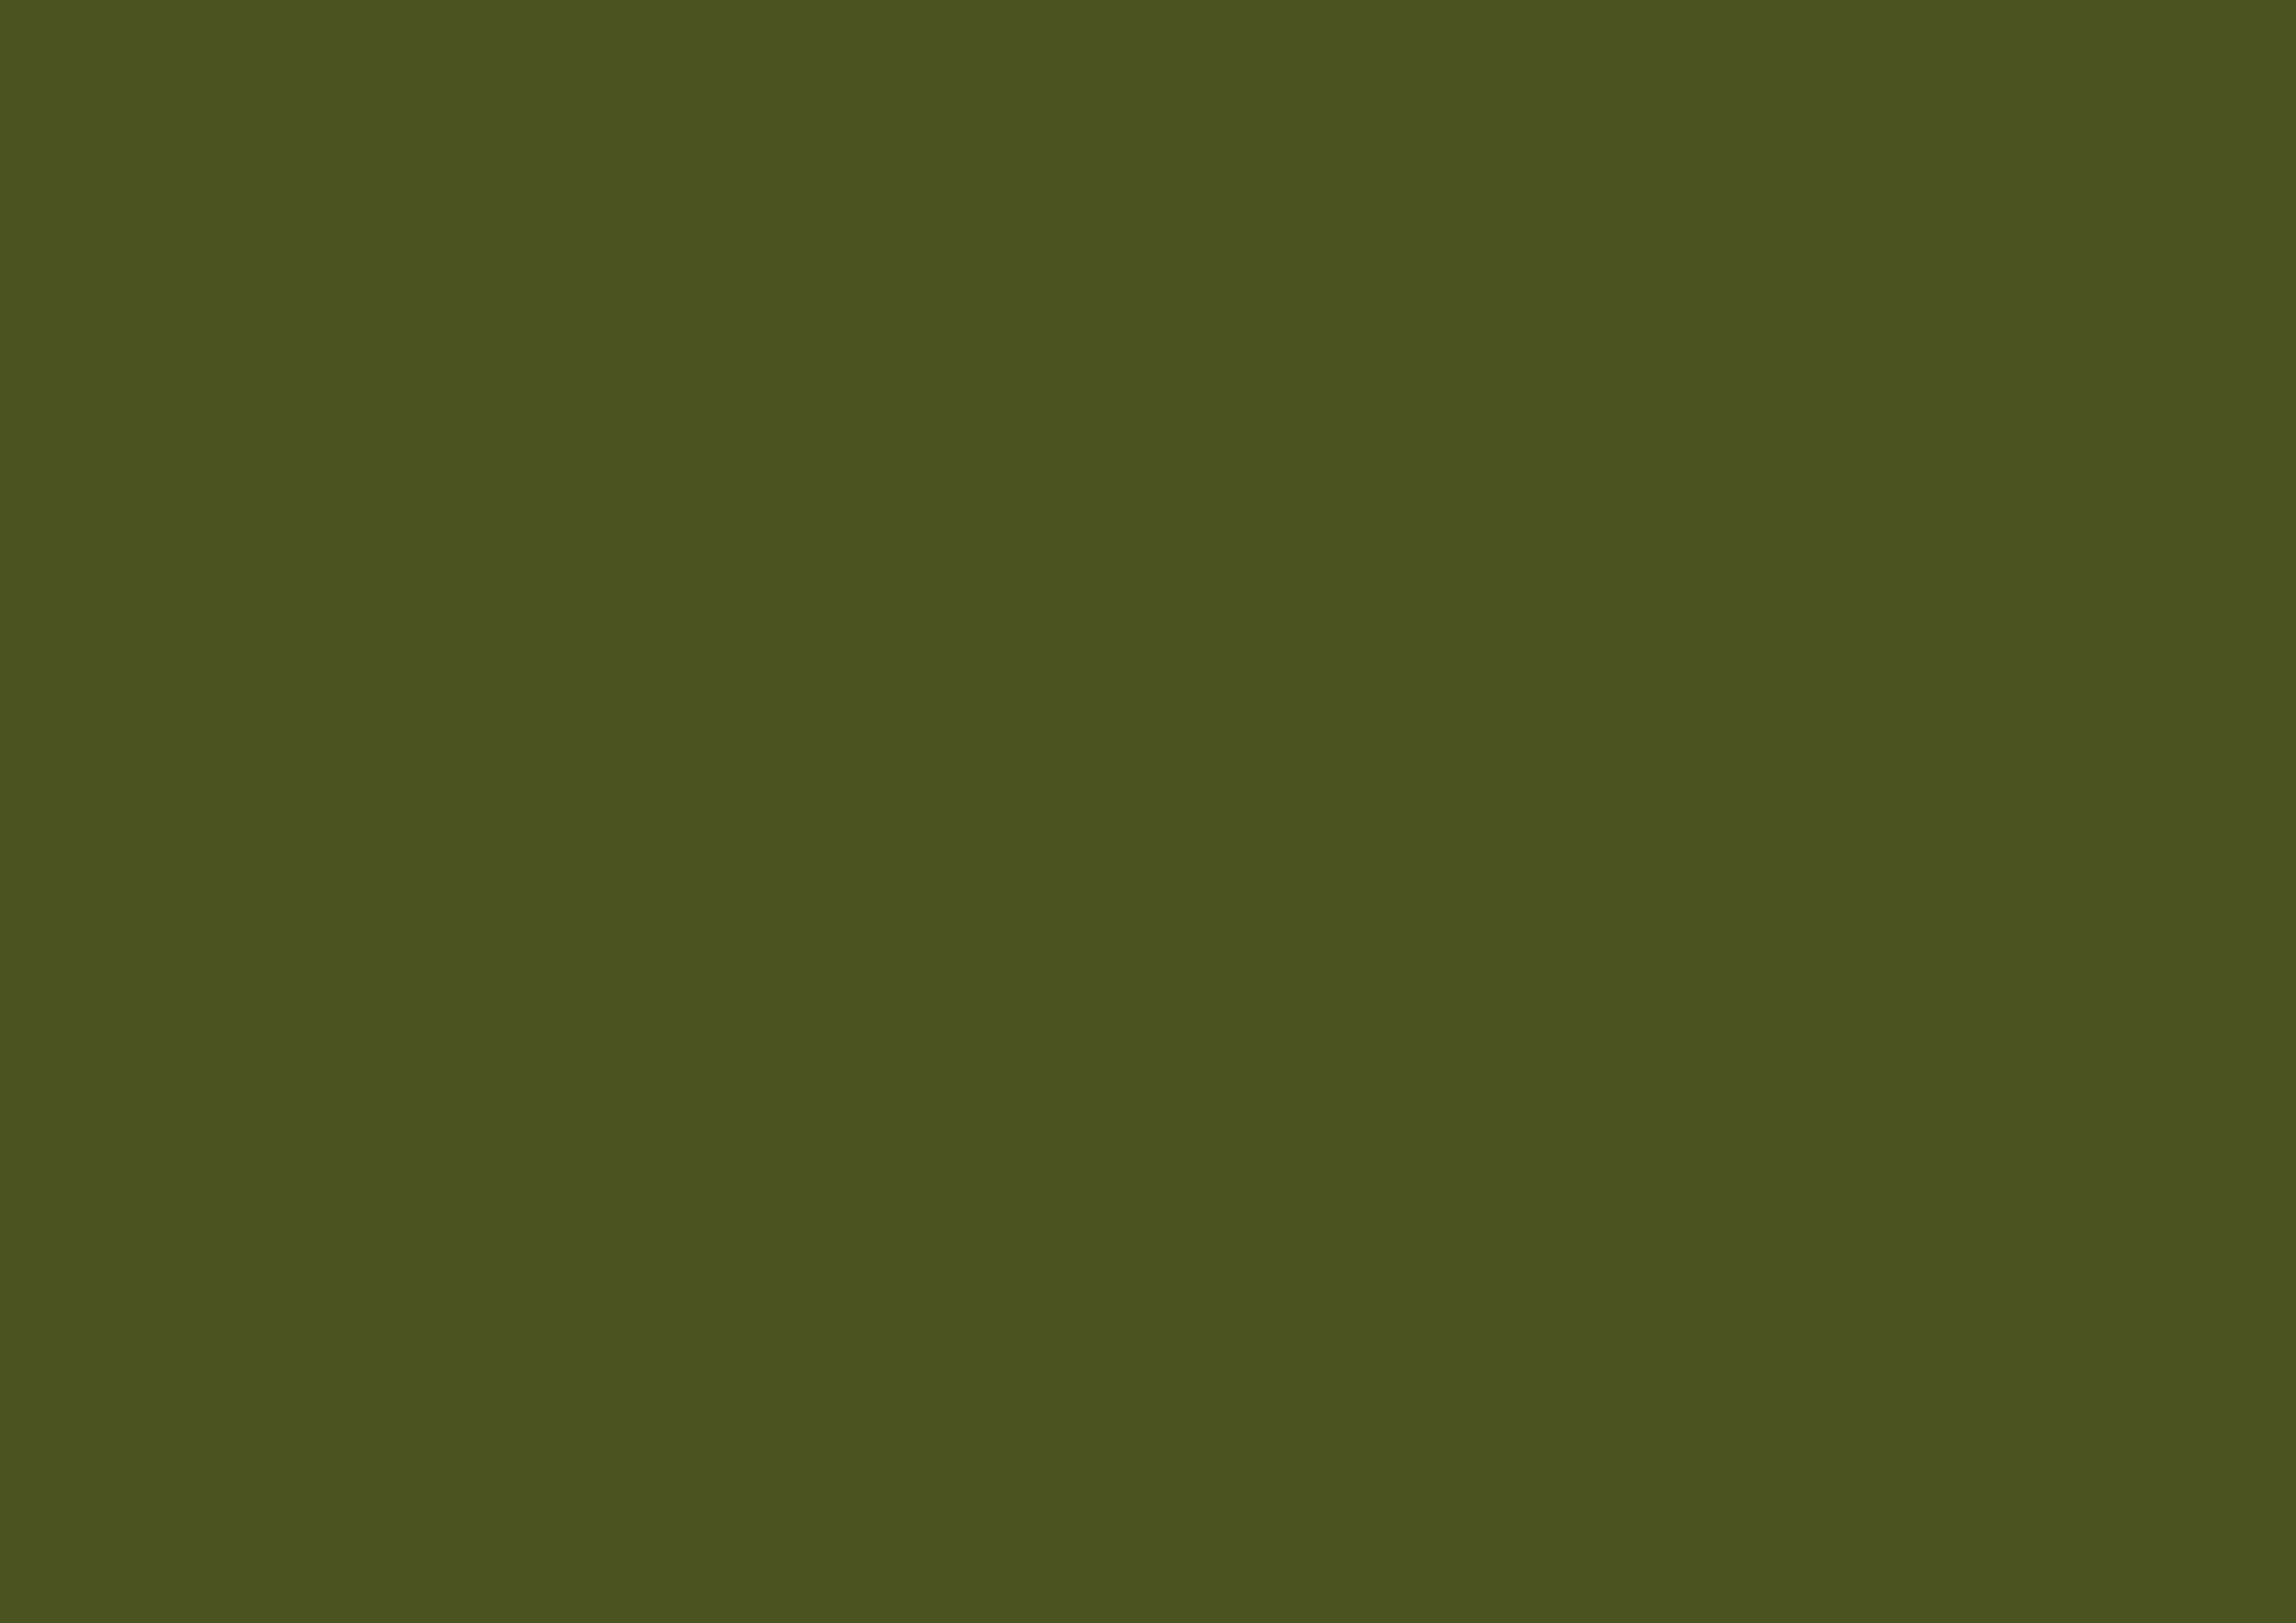 3508x2480 Army Green Solid Color Background